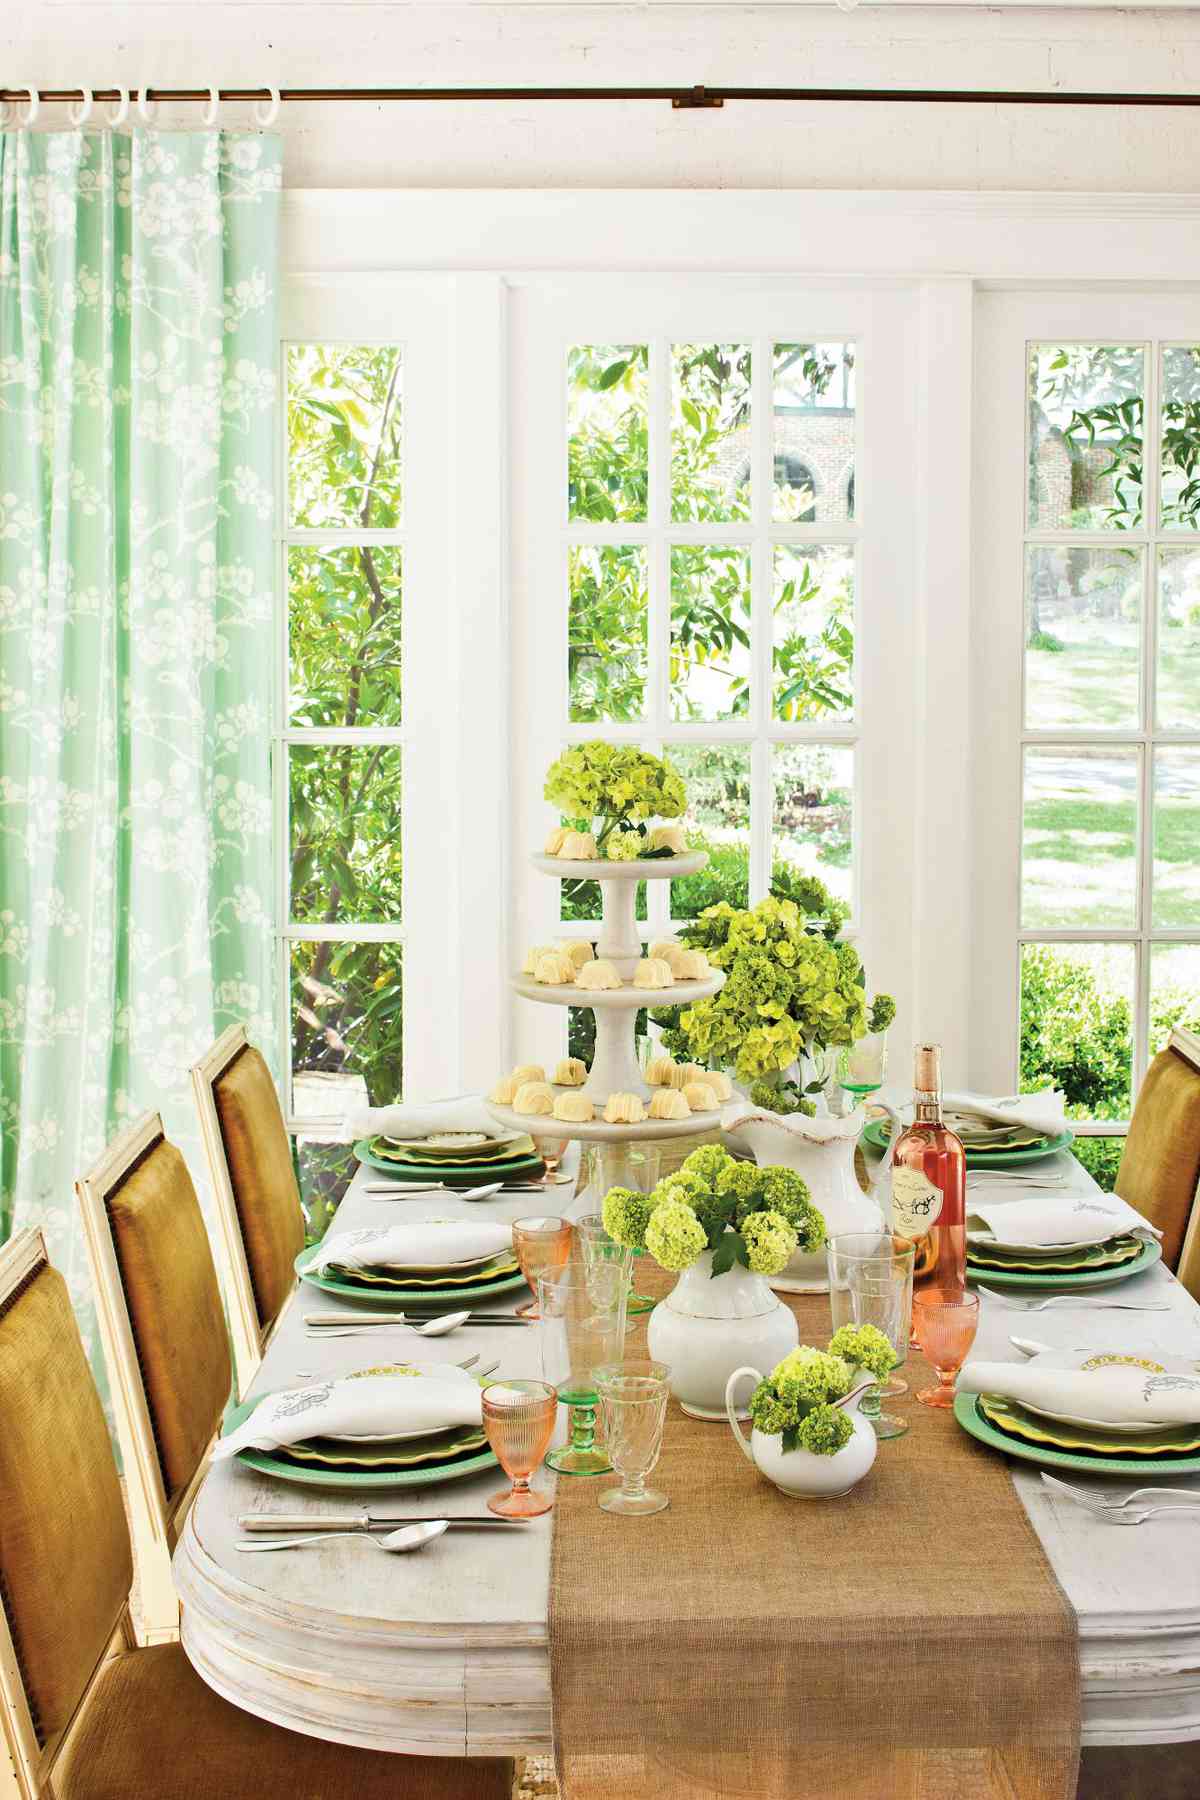 The Elegant, Yet Casual, Table Setting